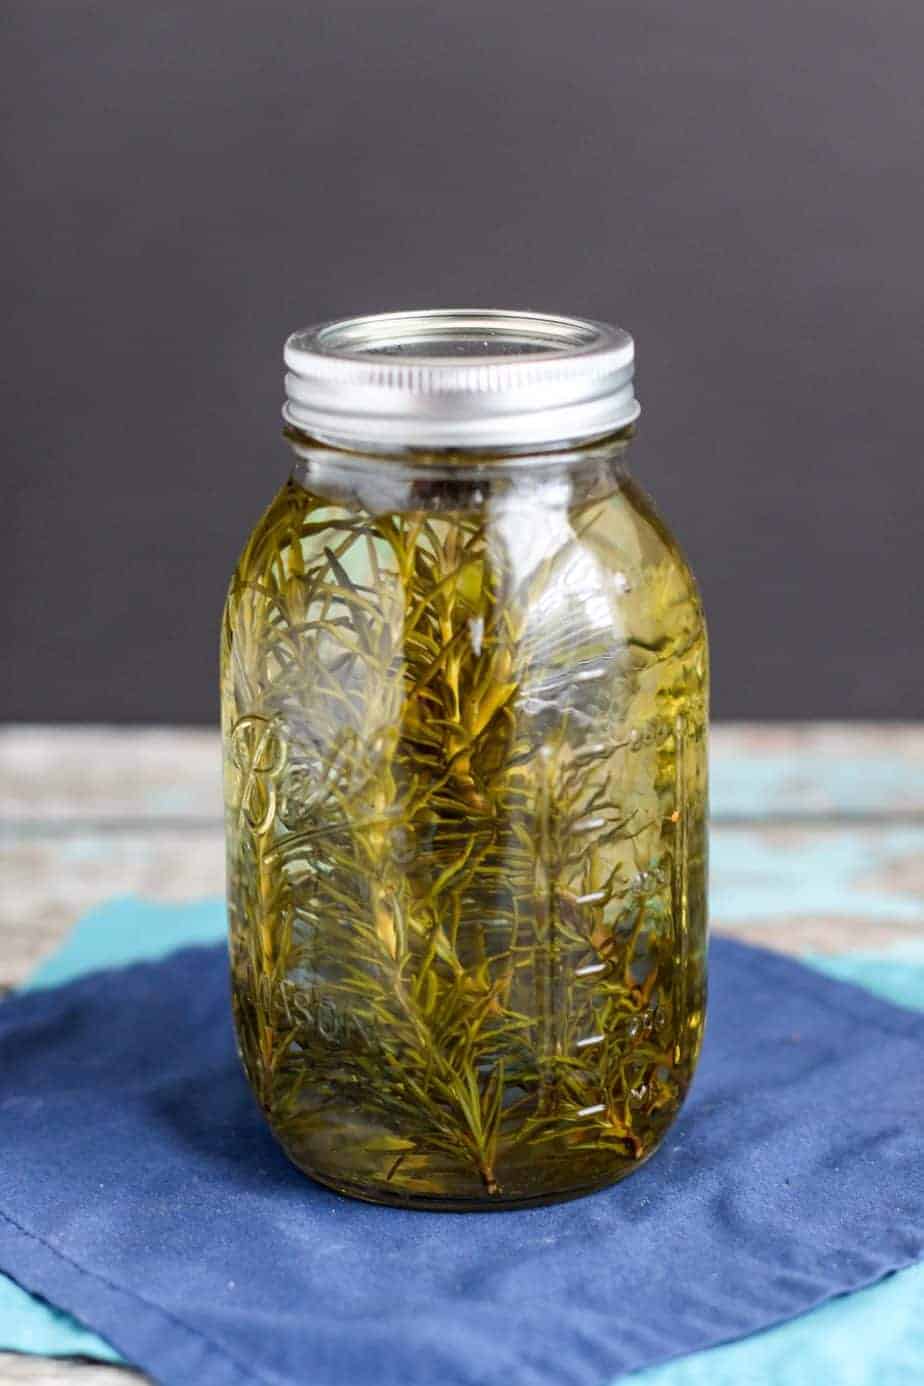 Rosemary Infused Vodka - A Nerd Cooks